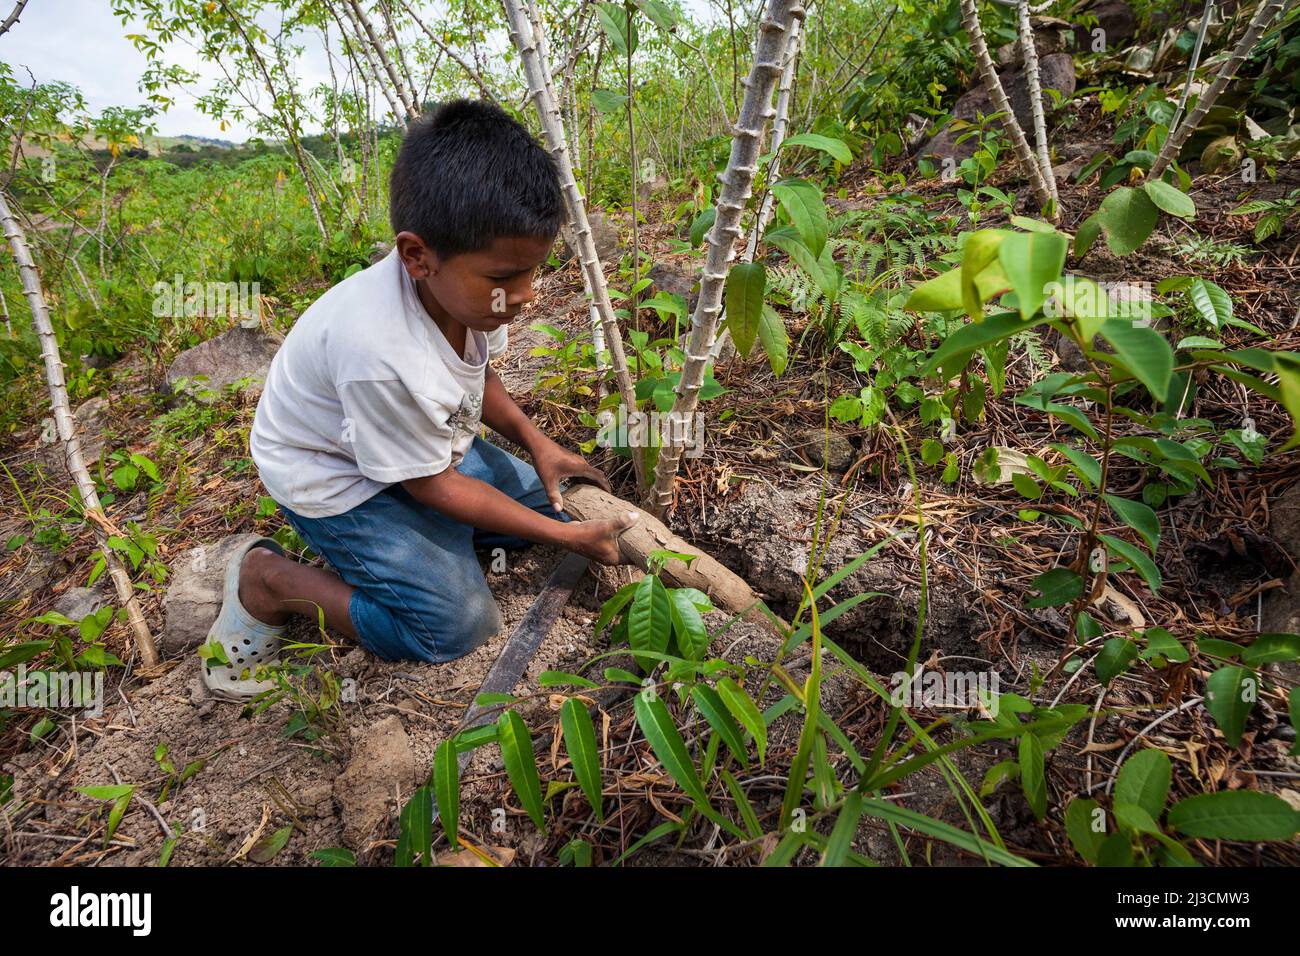 A young boy is harvesting yuca in Las MInas de Tulu, Cocle province, Republic of Panama, Central America. Stock Photo